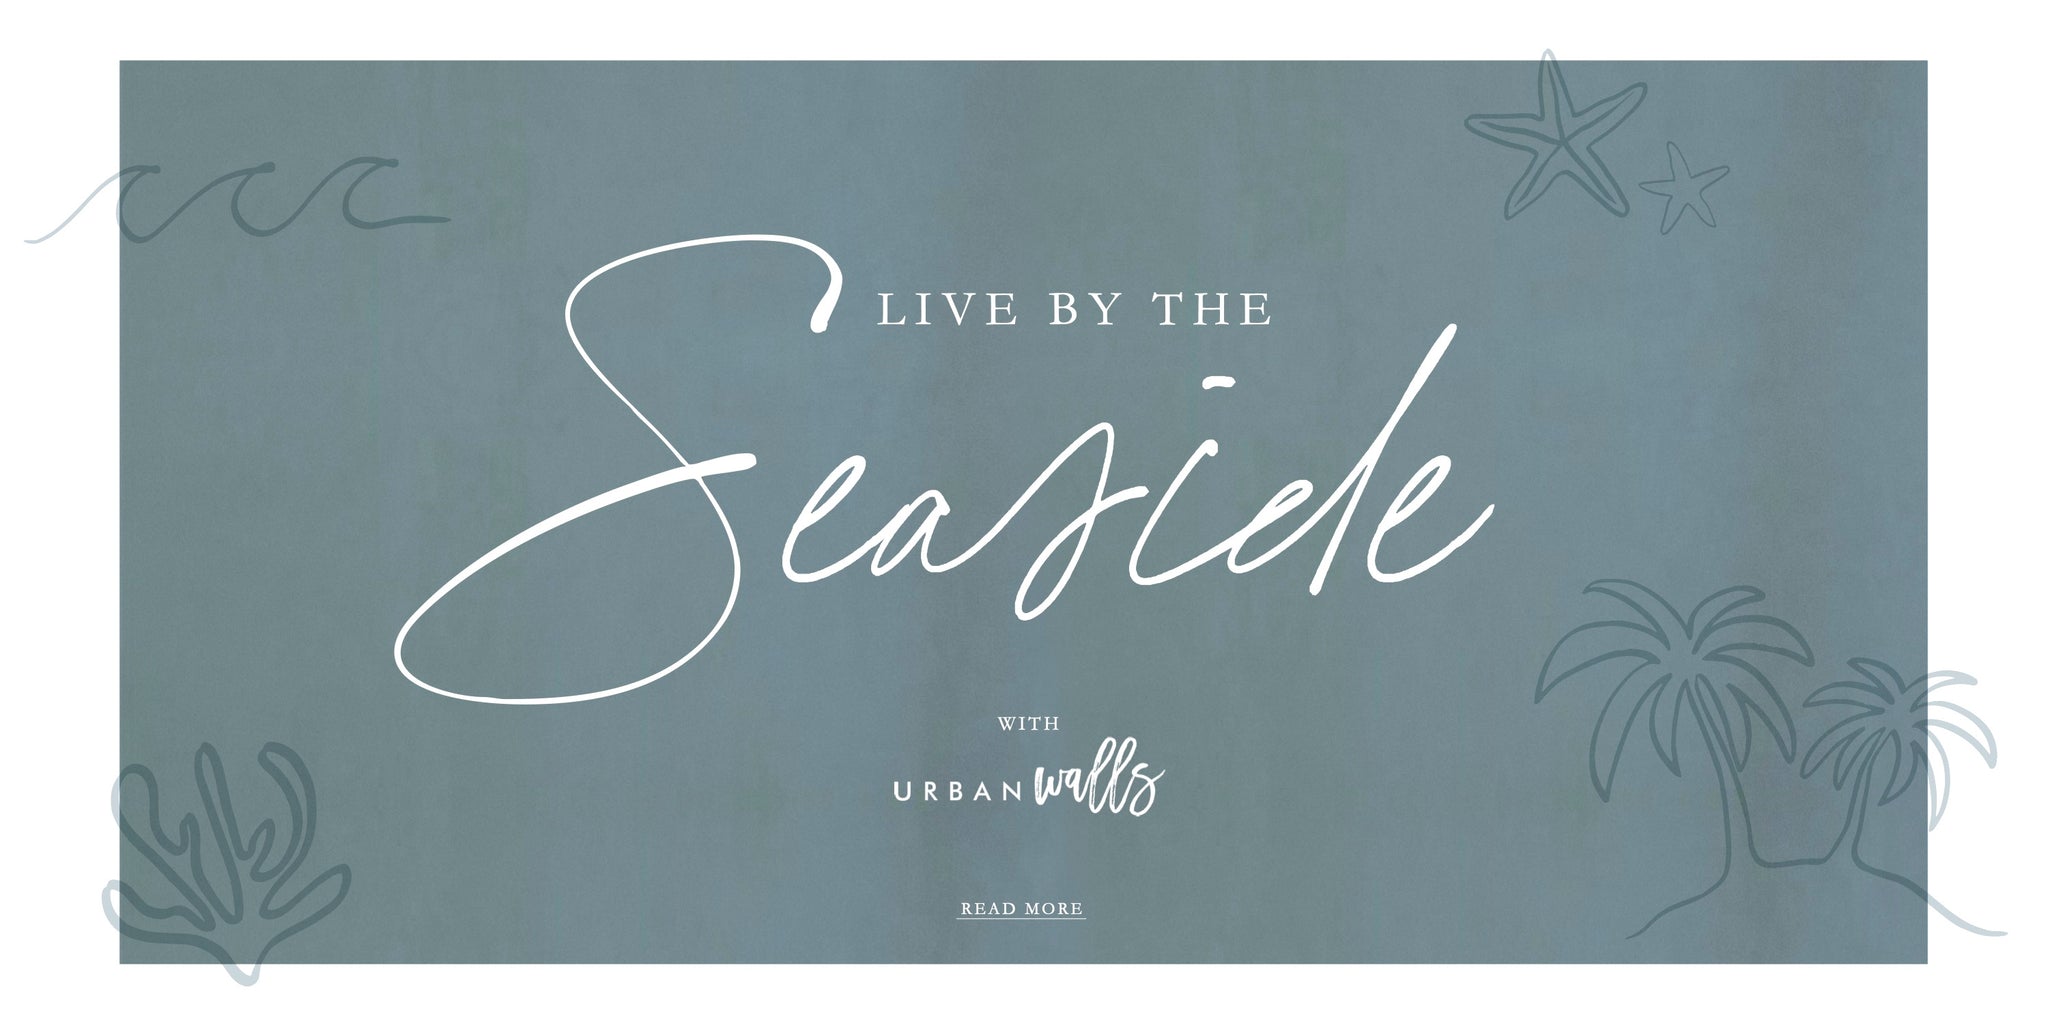 Live by the seaside